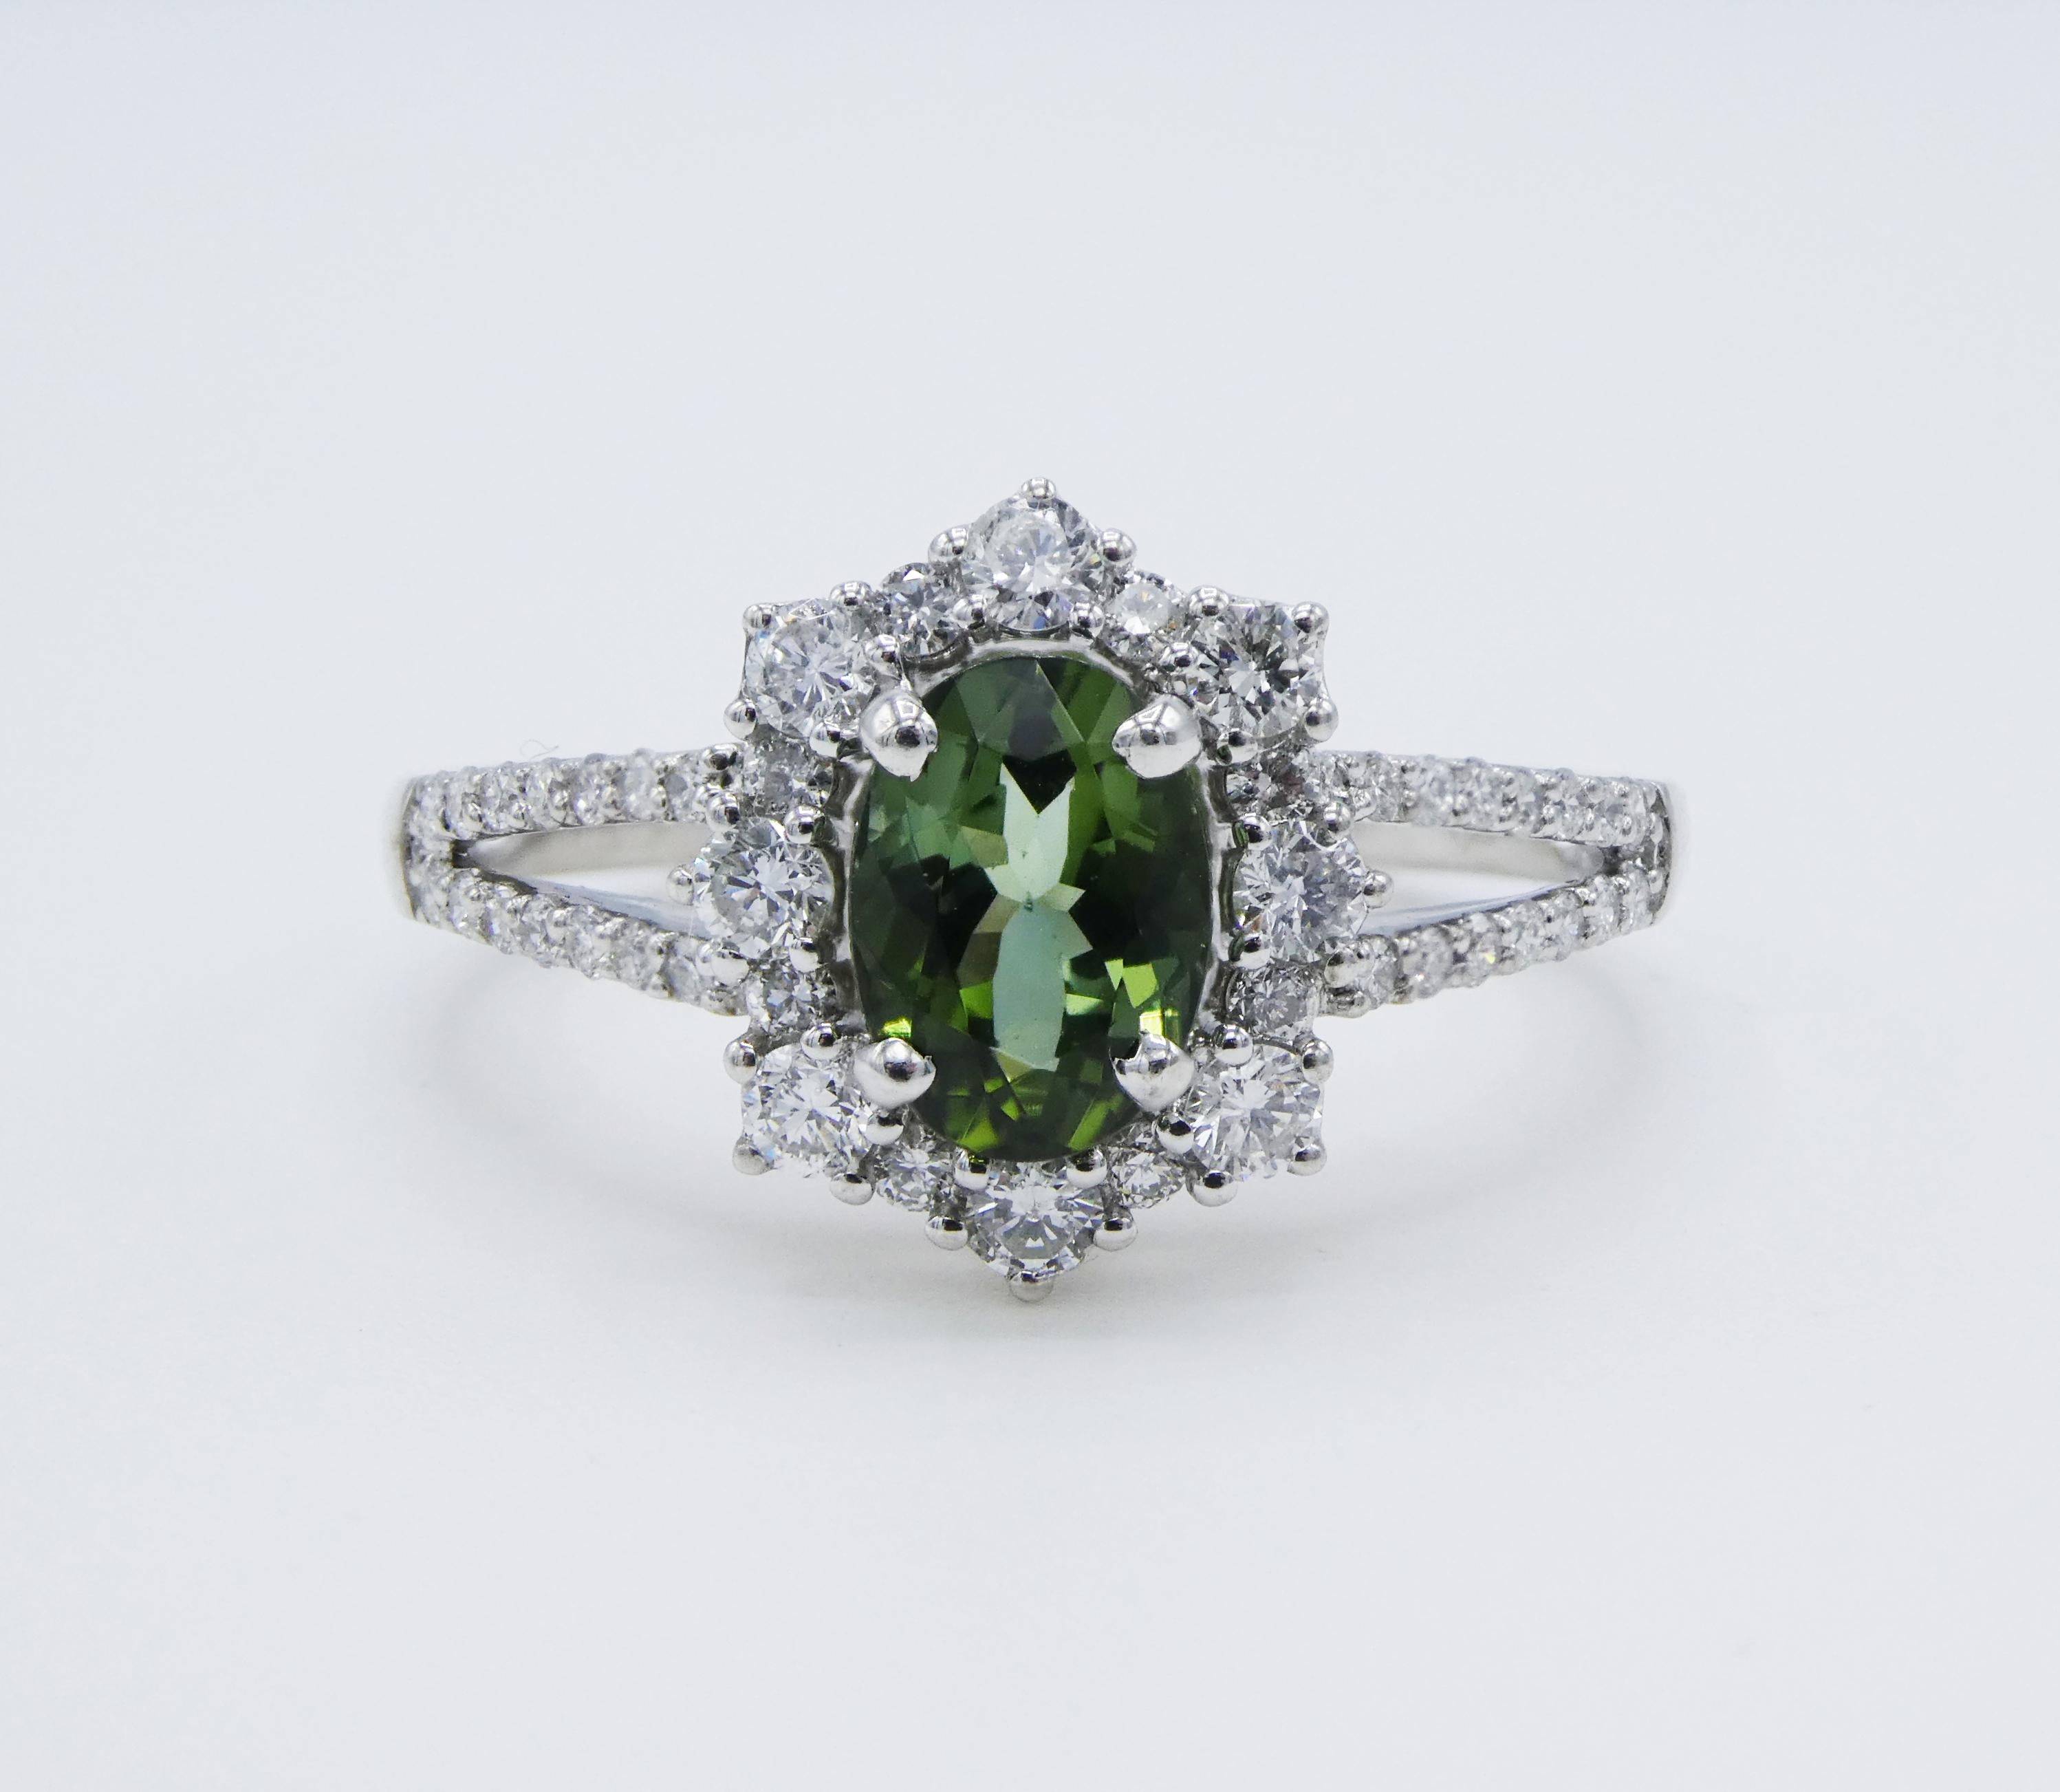 0.75ct Tourmaline Diamond Ring 18k White Gold Halo Style Split Shank Size 7

Metal: 18k White Gold
Weight: 3.57 grams
Tourmaline: approx. 0.75 carat oval 7 x 5mm
Diamonds: 0.47 carats total weight G VS
Ring size: 7
Markings: 